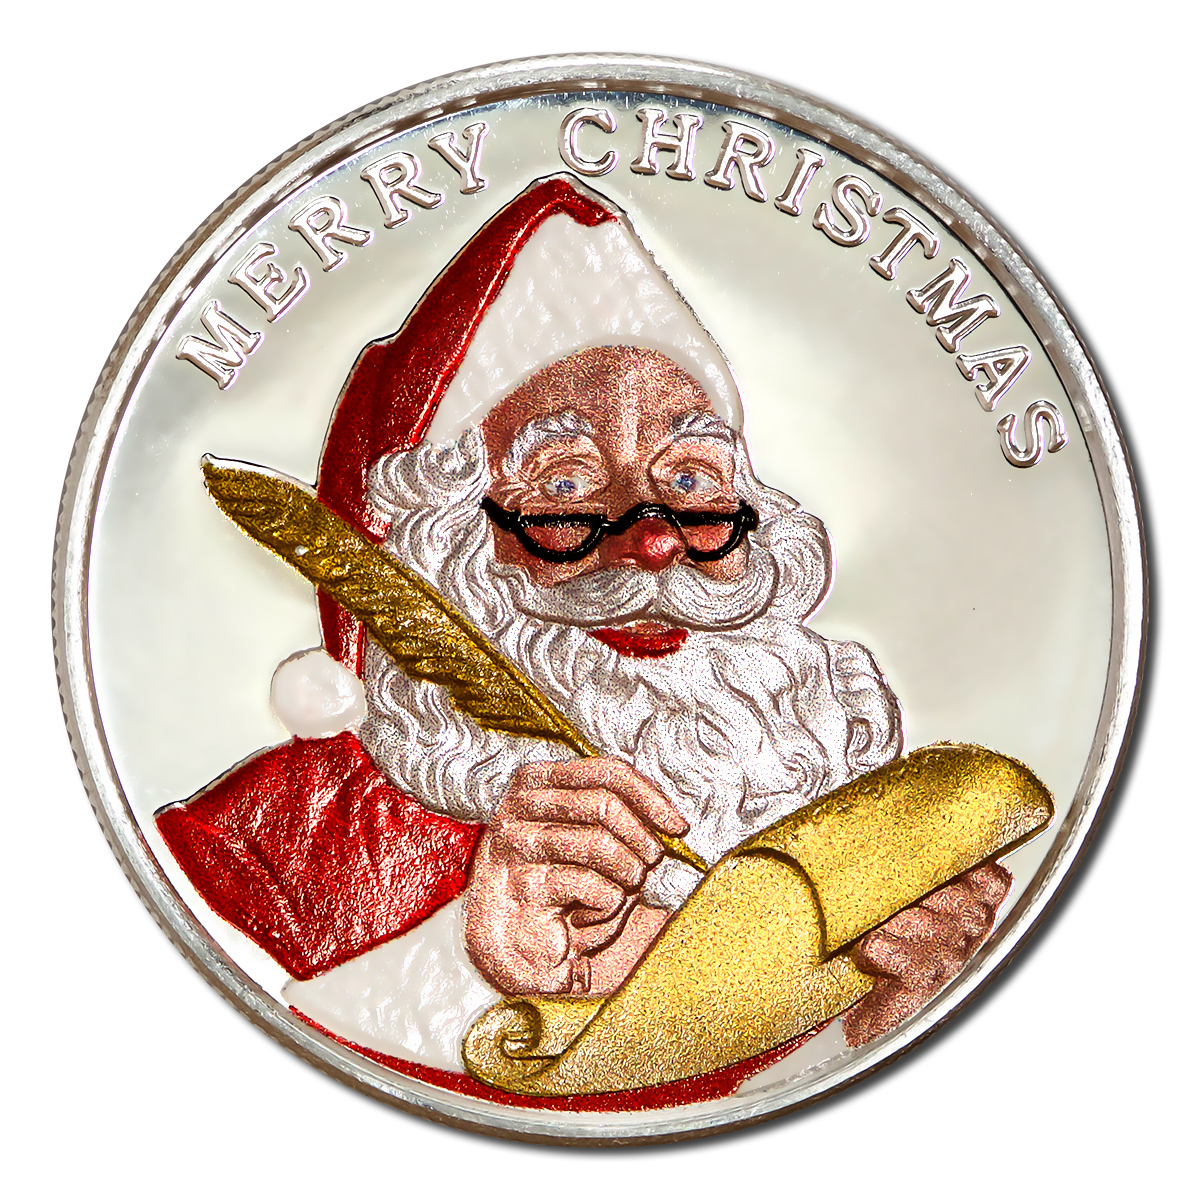 Give the Gift of Investment – Give Coins